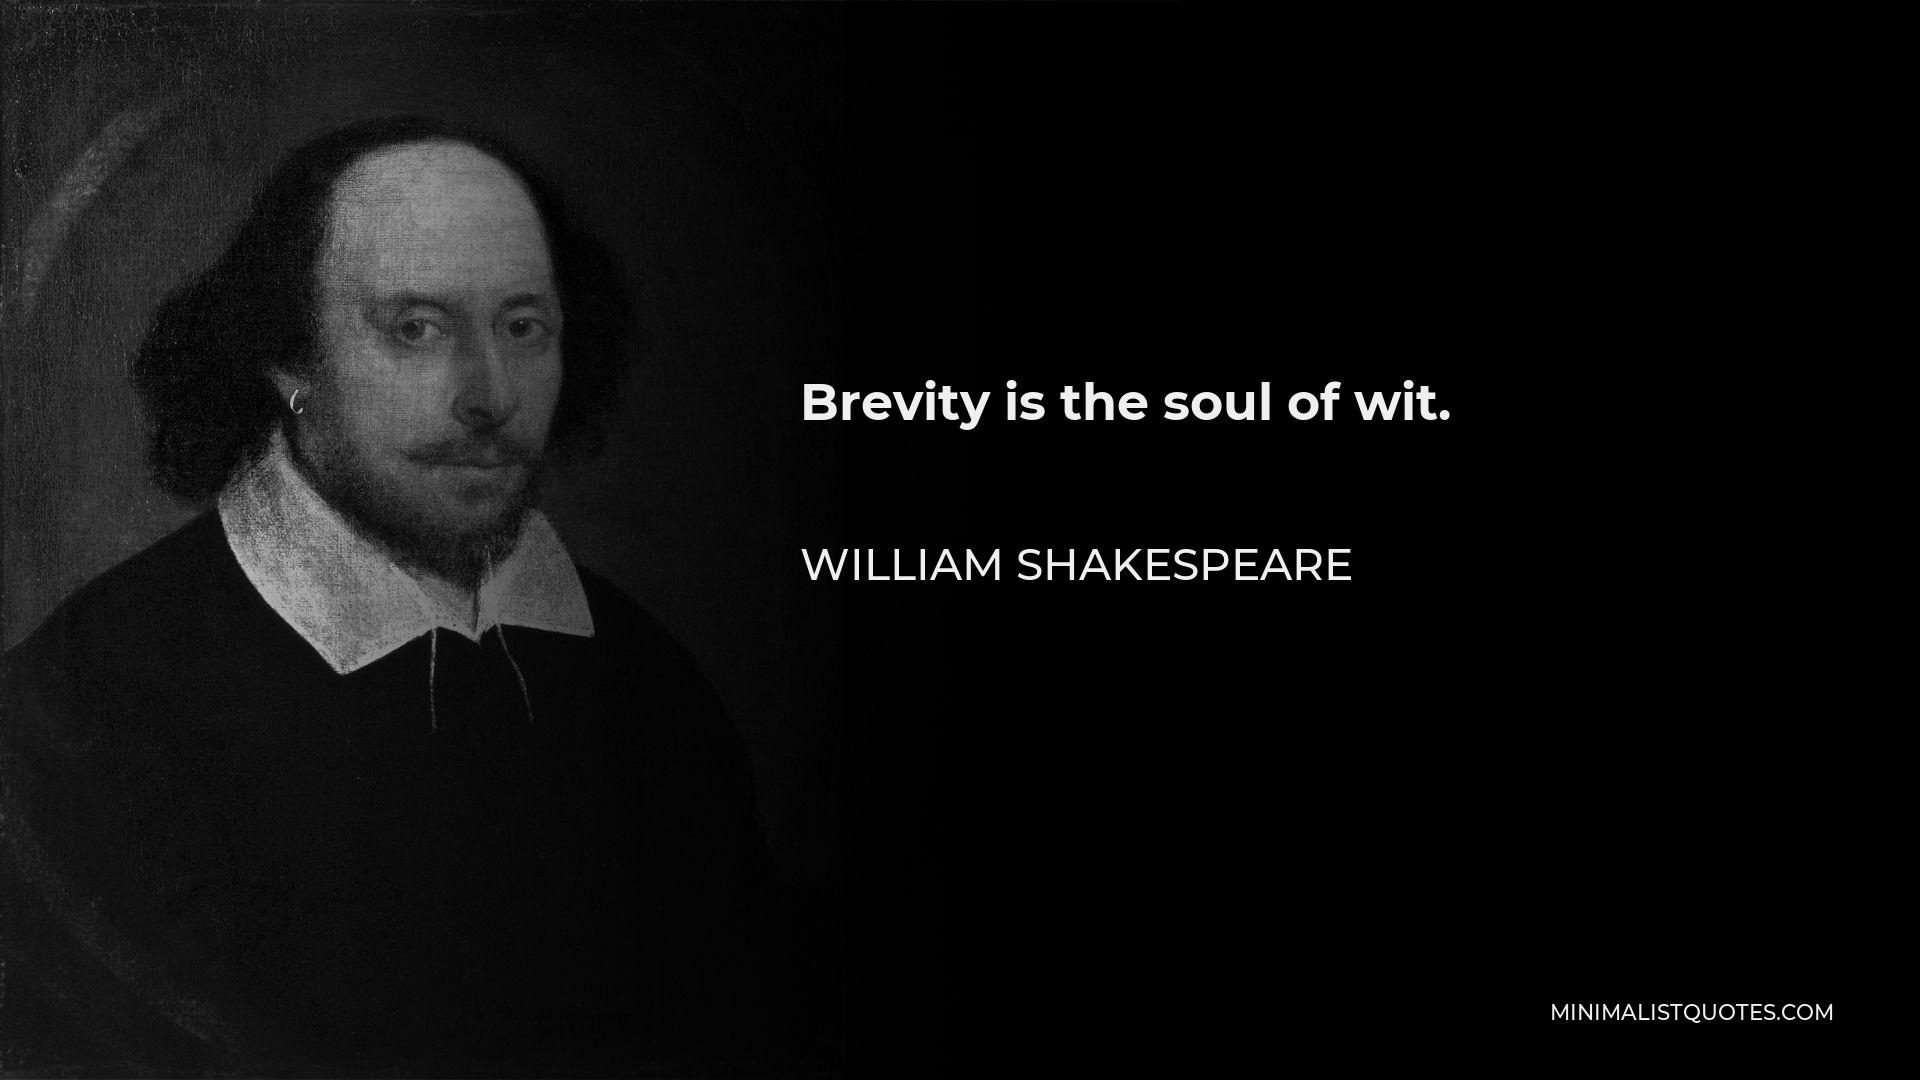 William Shakespeare Quote - Brevity is the soul of wit.